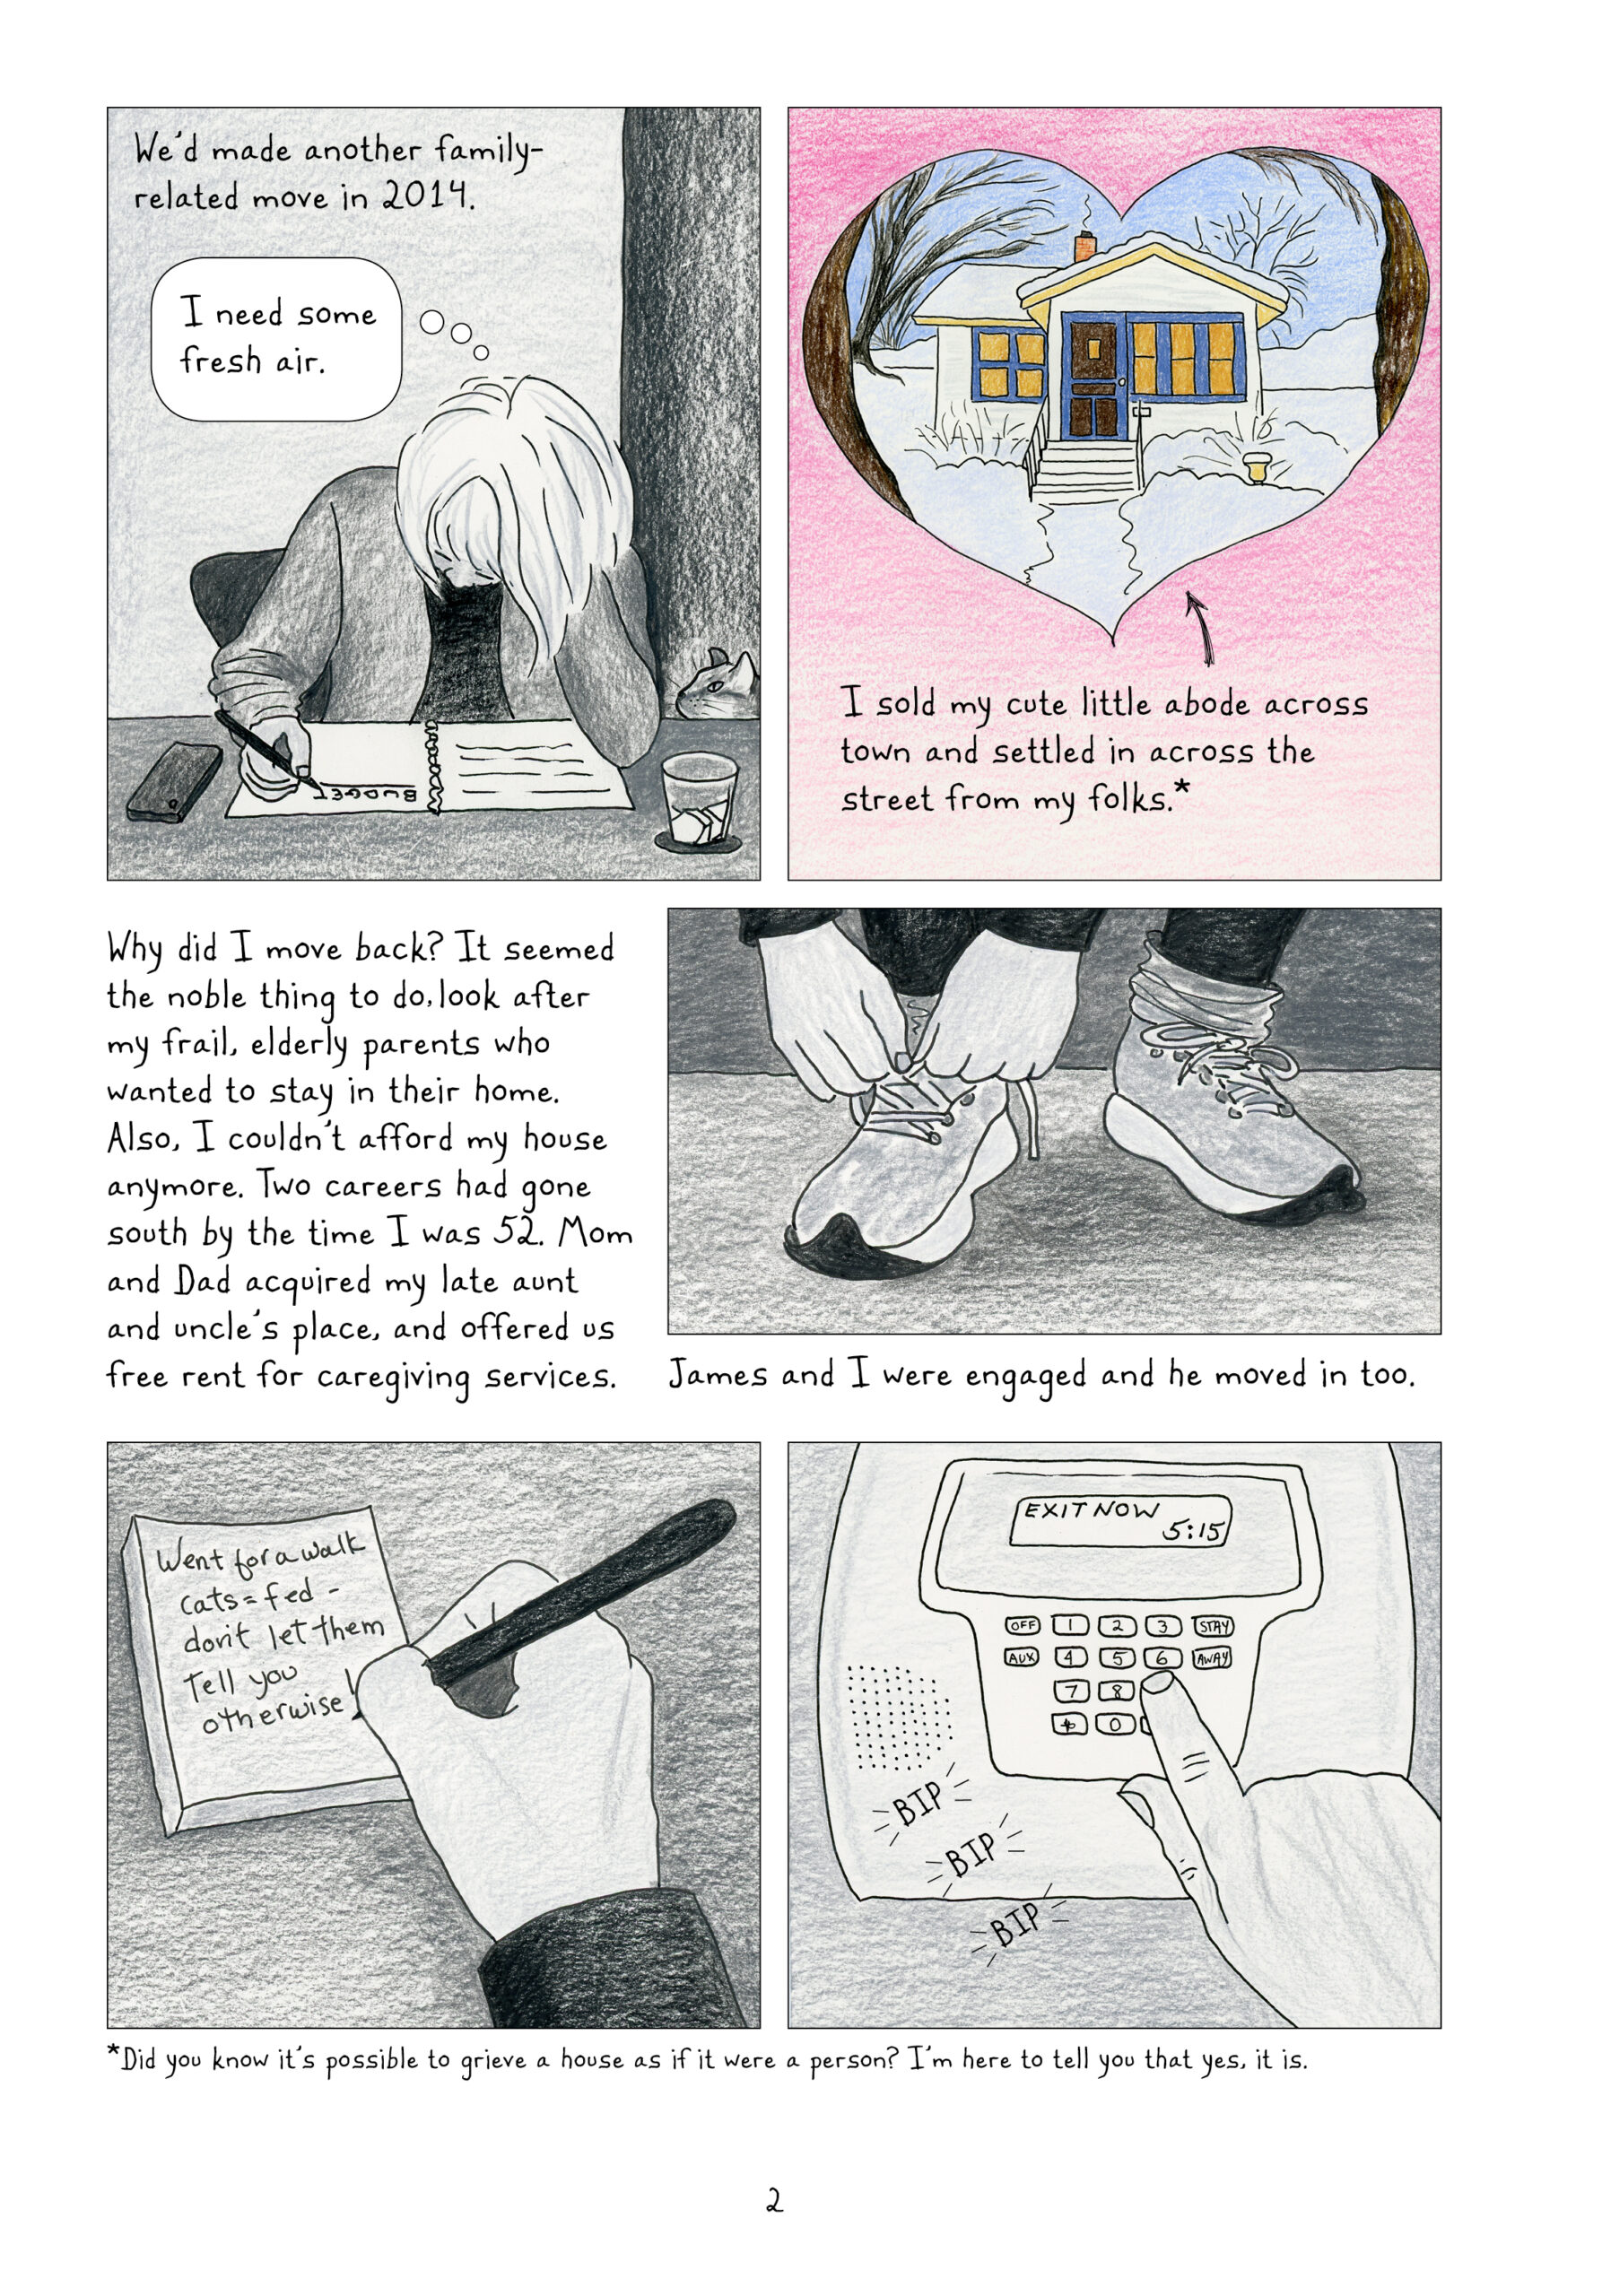 Elsewhere p.1
Lynn reflects on moving back in with her parents
All panels are drawn in gray-scale, except for one of her old home that she sold, which is in full color and framed in a heart shape